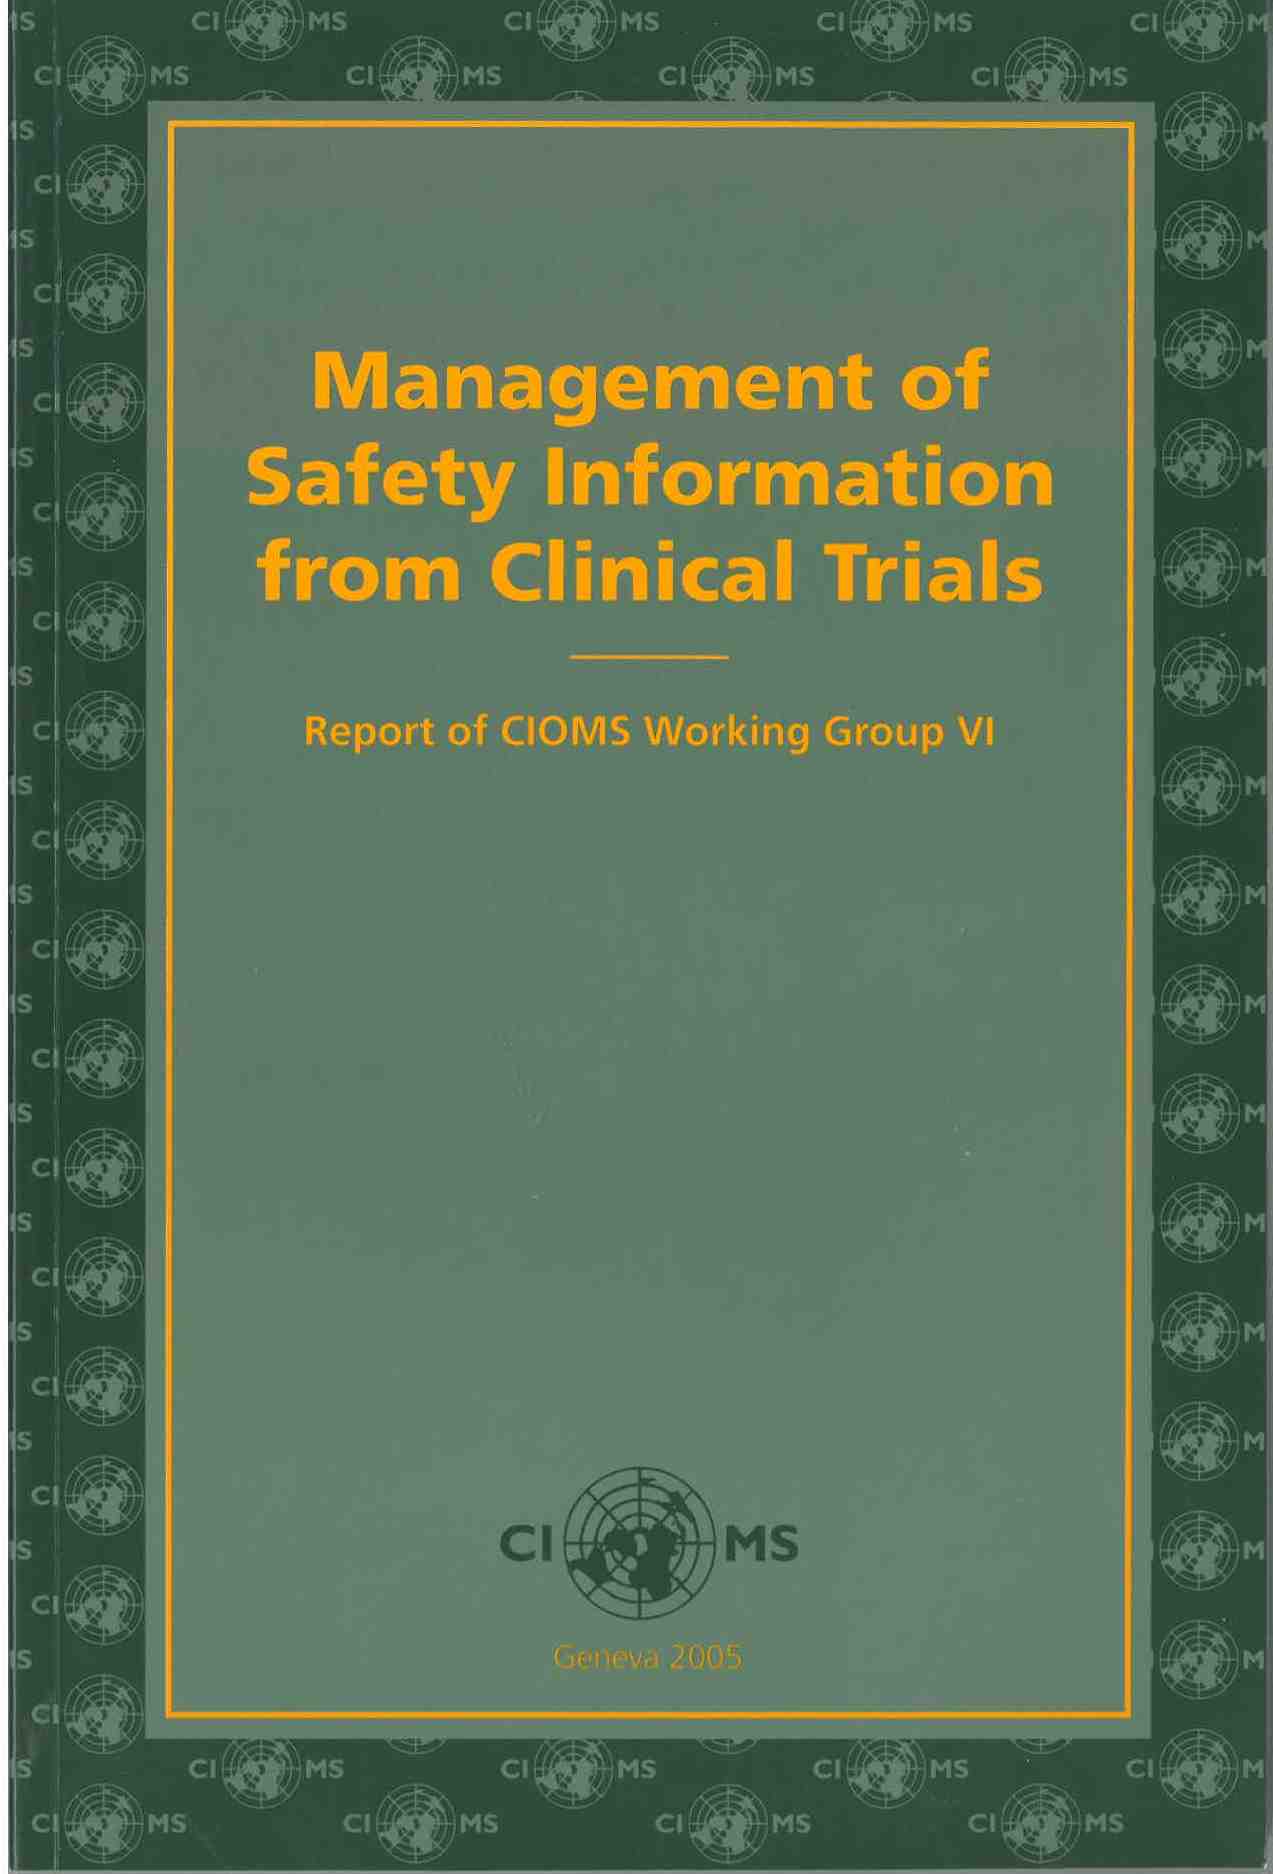 Management of Safety Information from Clinical Trials: Report of CIOMS Working Group VI - CIOMS